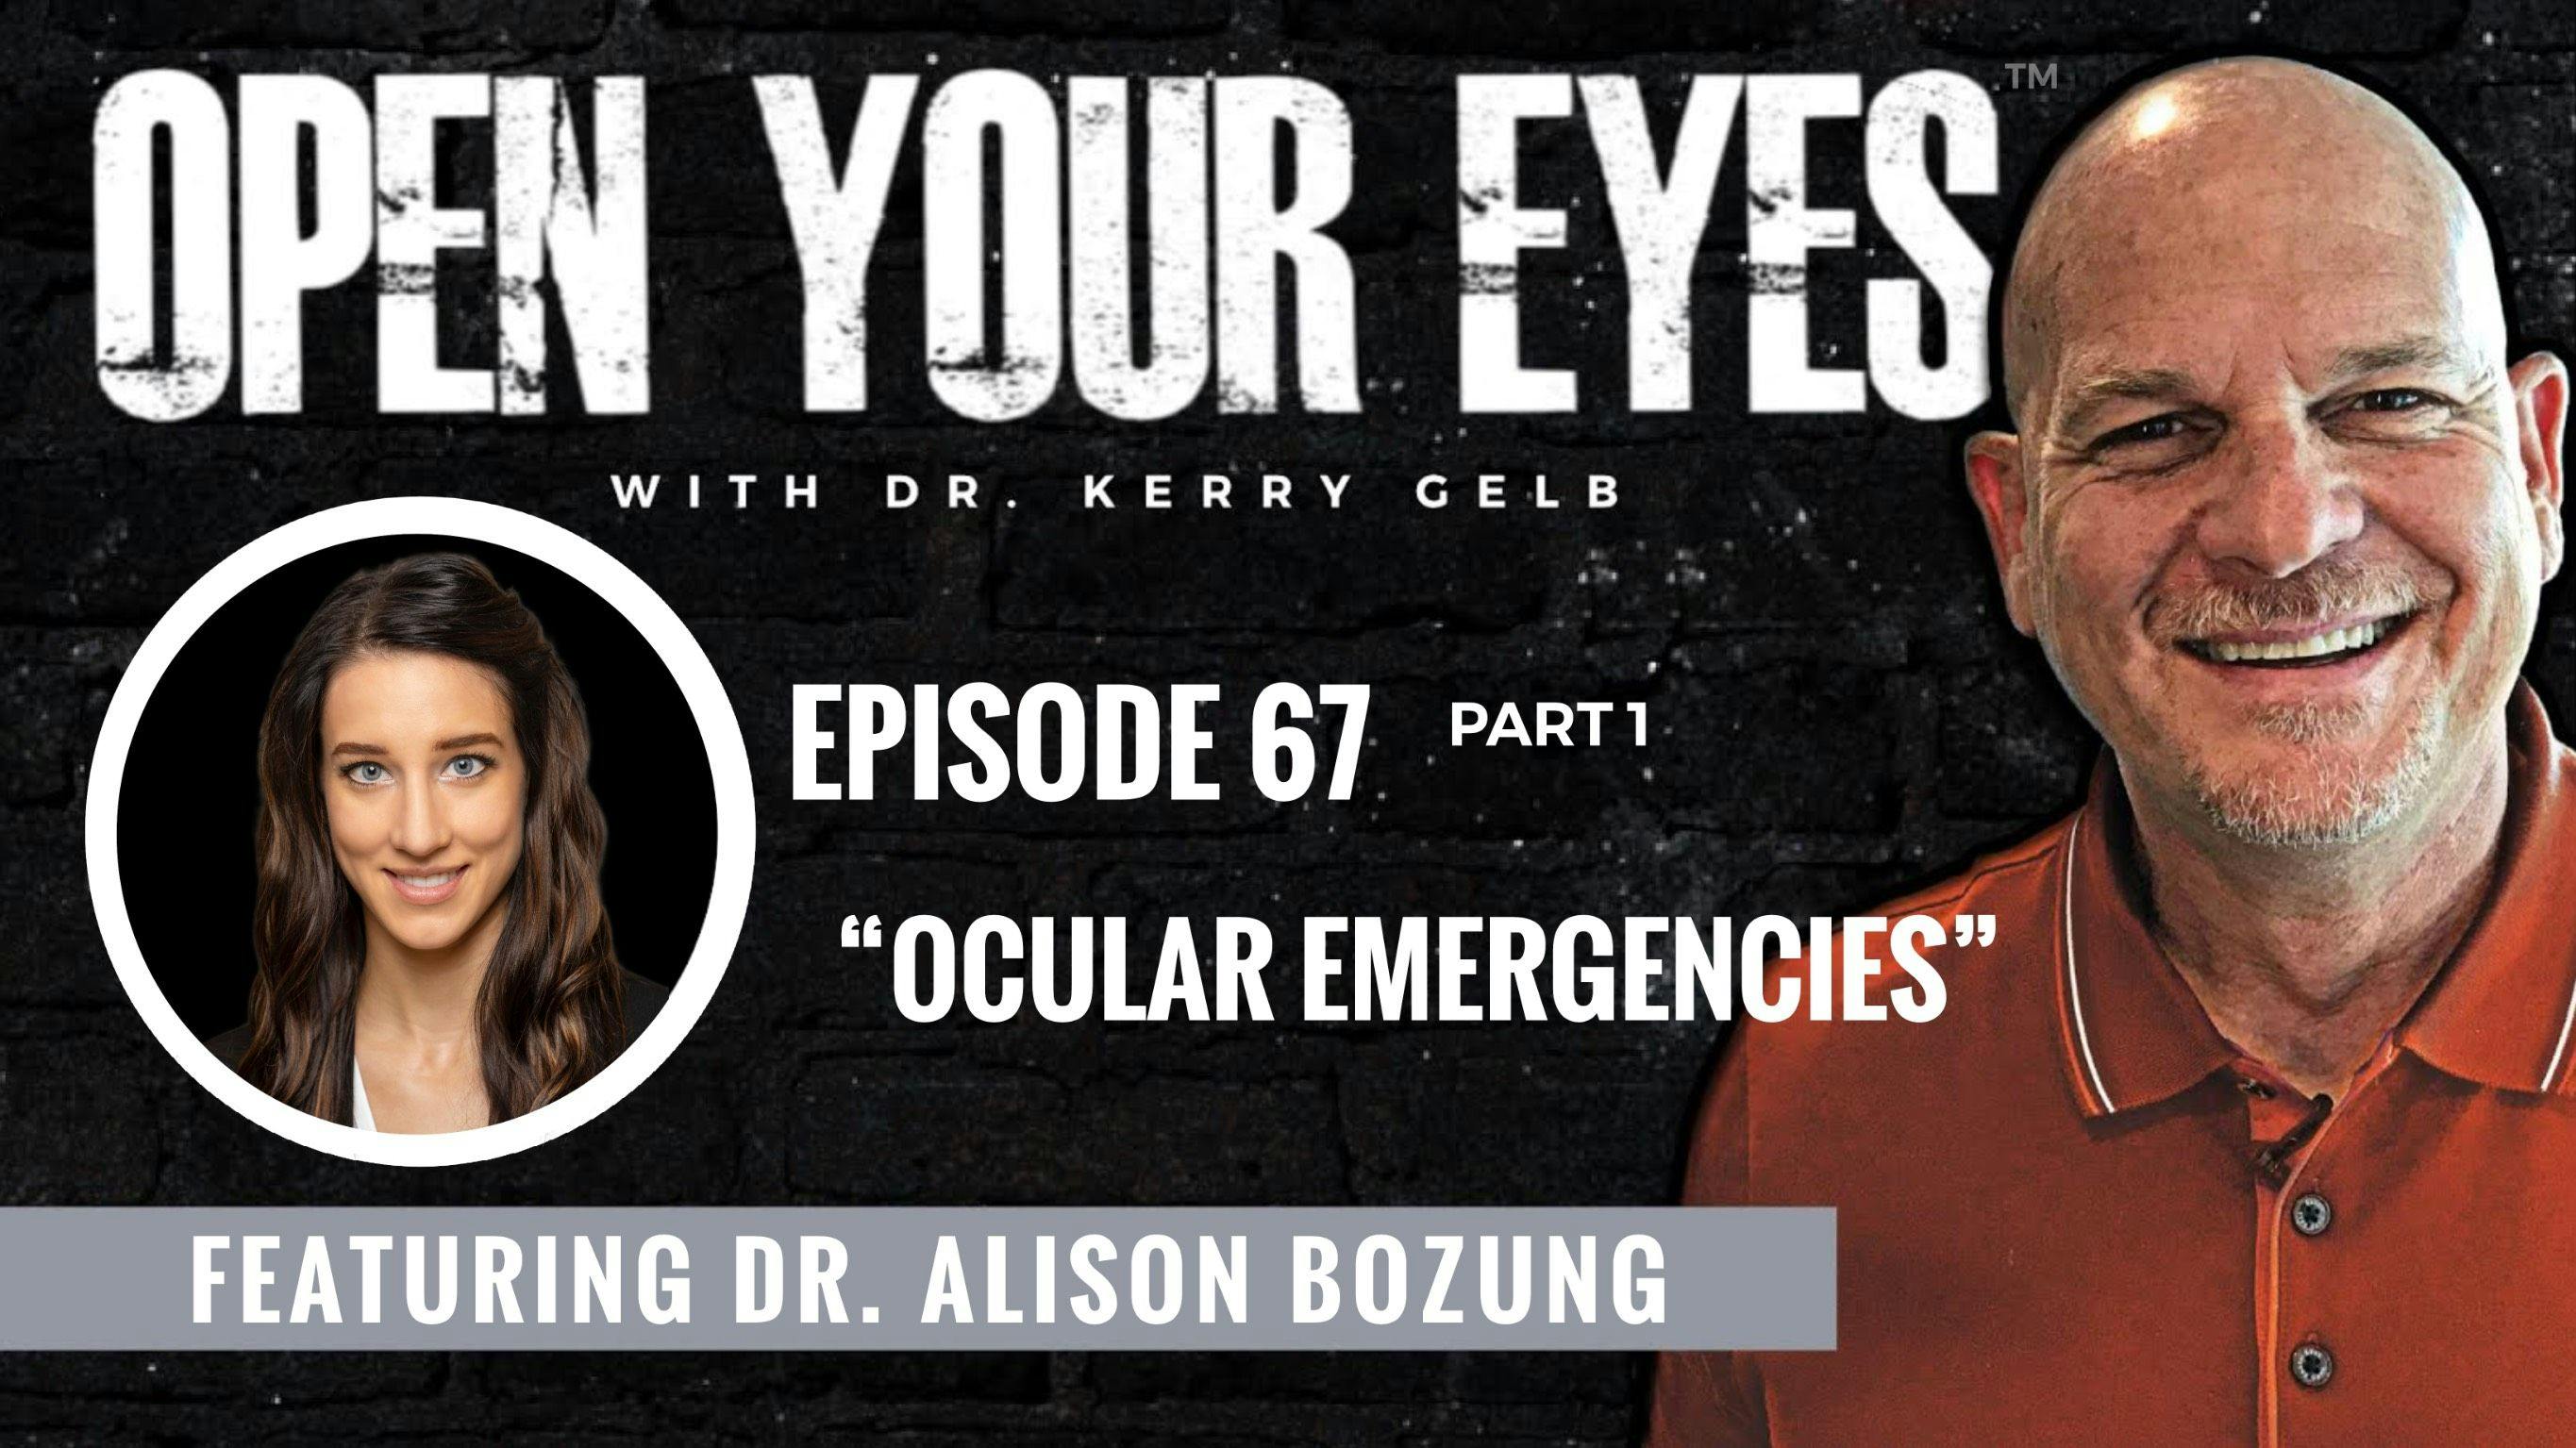 In this week's episode, Alison Bozung, OD, speaks on classifying "ocular emergencies," differentiating between urgencies and emergencies from a patient's perspective, and much more! 